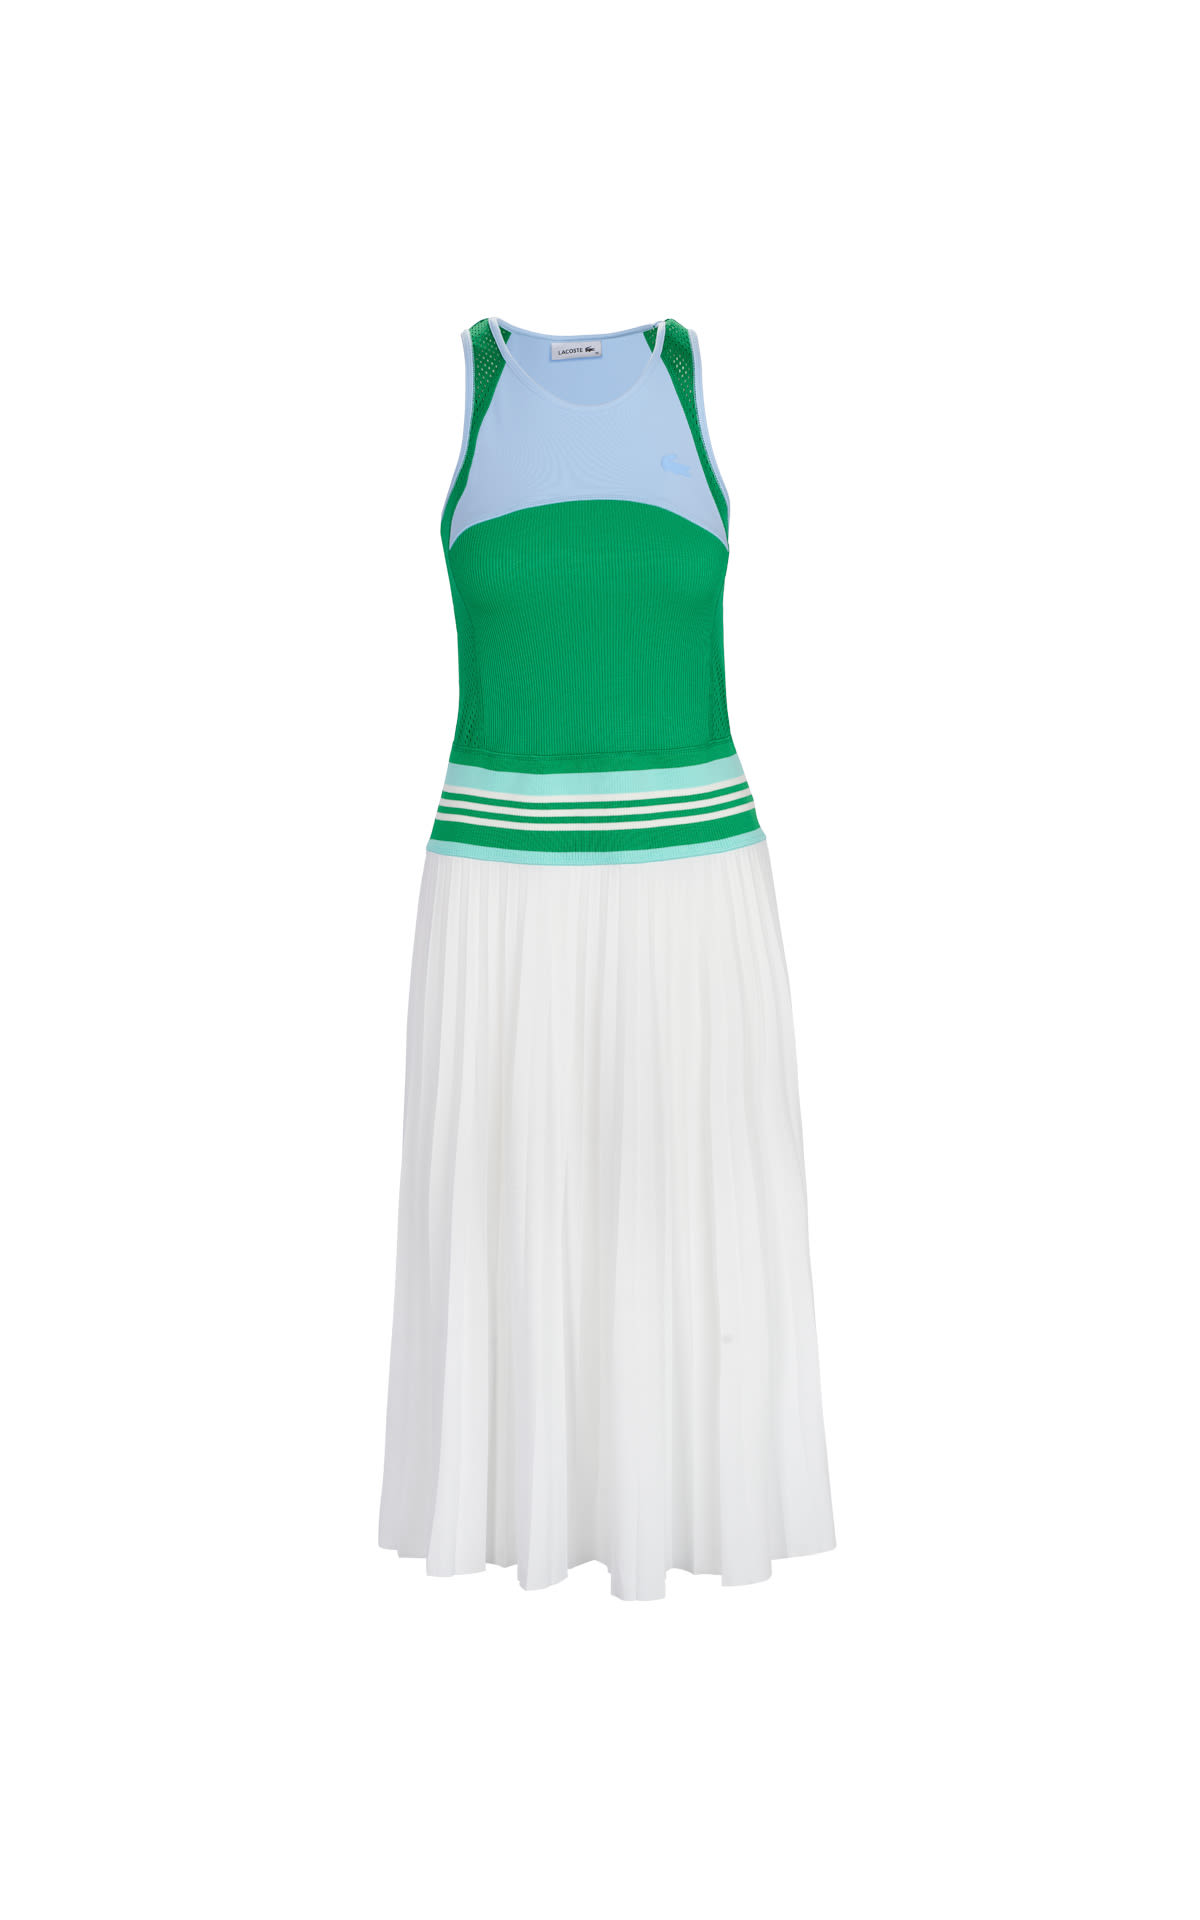 Green and white tennis dress Lacoste